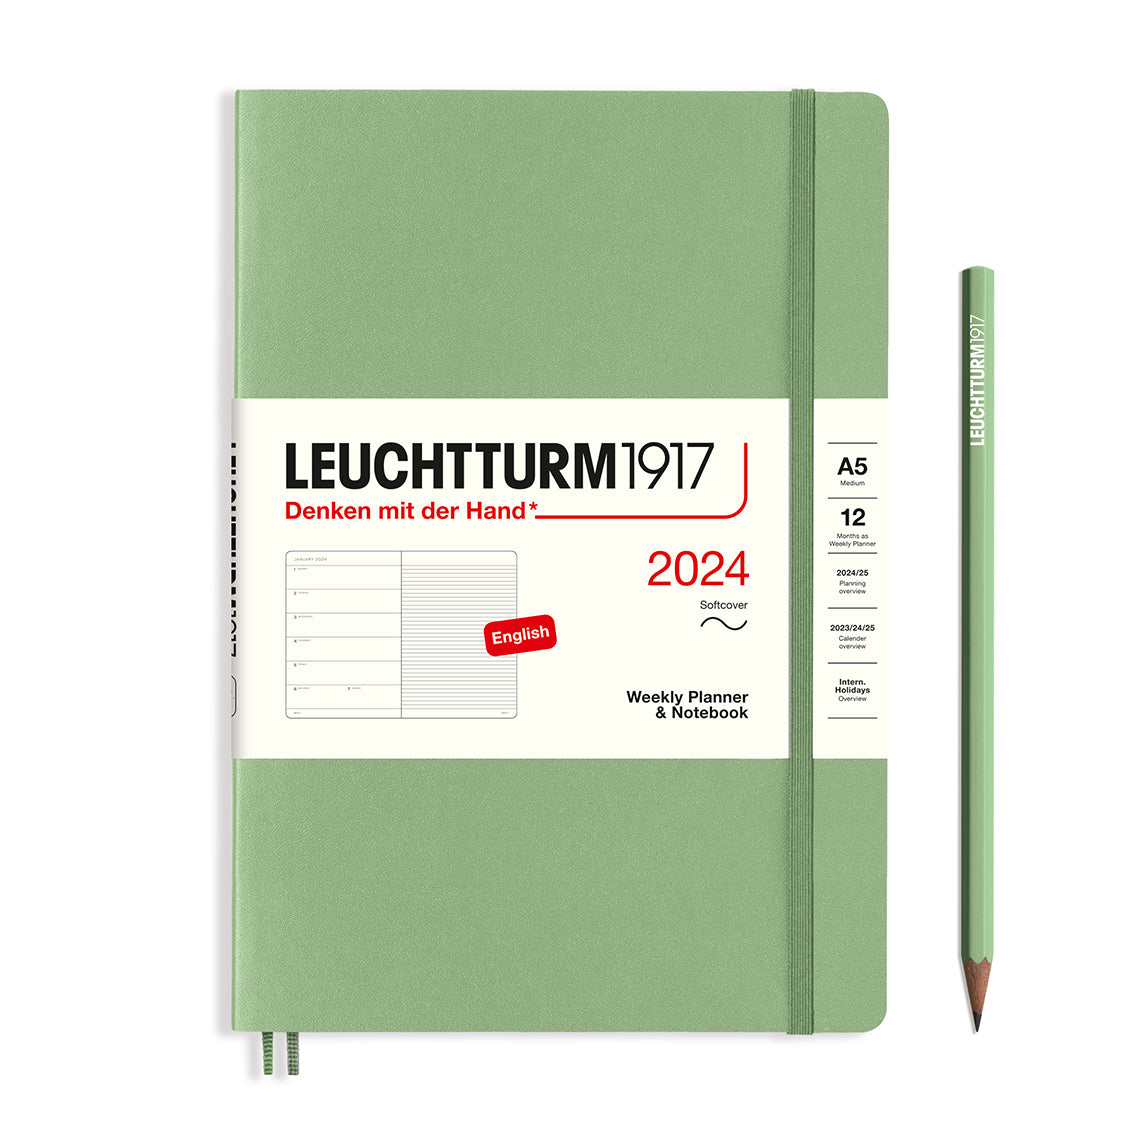 An image of a sage green planner with a sage green elastic band holding it together and a cream paper wrap around the middle stating the business name Leuchtturm1917, that it is for the year 2024, it is a weekly planner and notebook, is A5 in size and an English language version. It has an image on the wrap showing the inside layout which is a week on the left hand page and a notes page on thr right hand page. A sage green pencil is shown at the side of the planner.